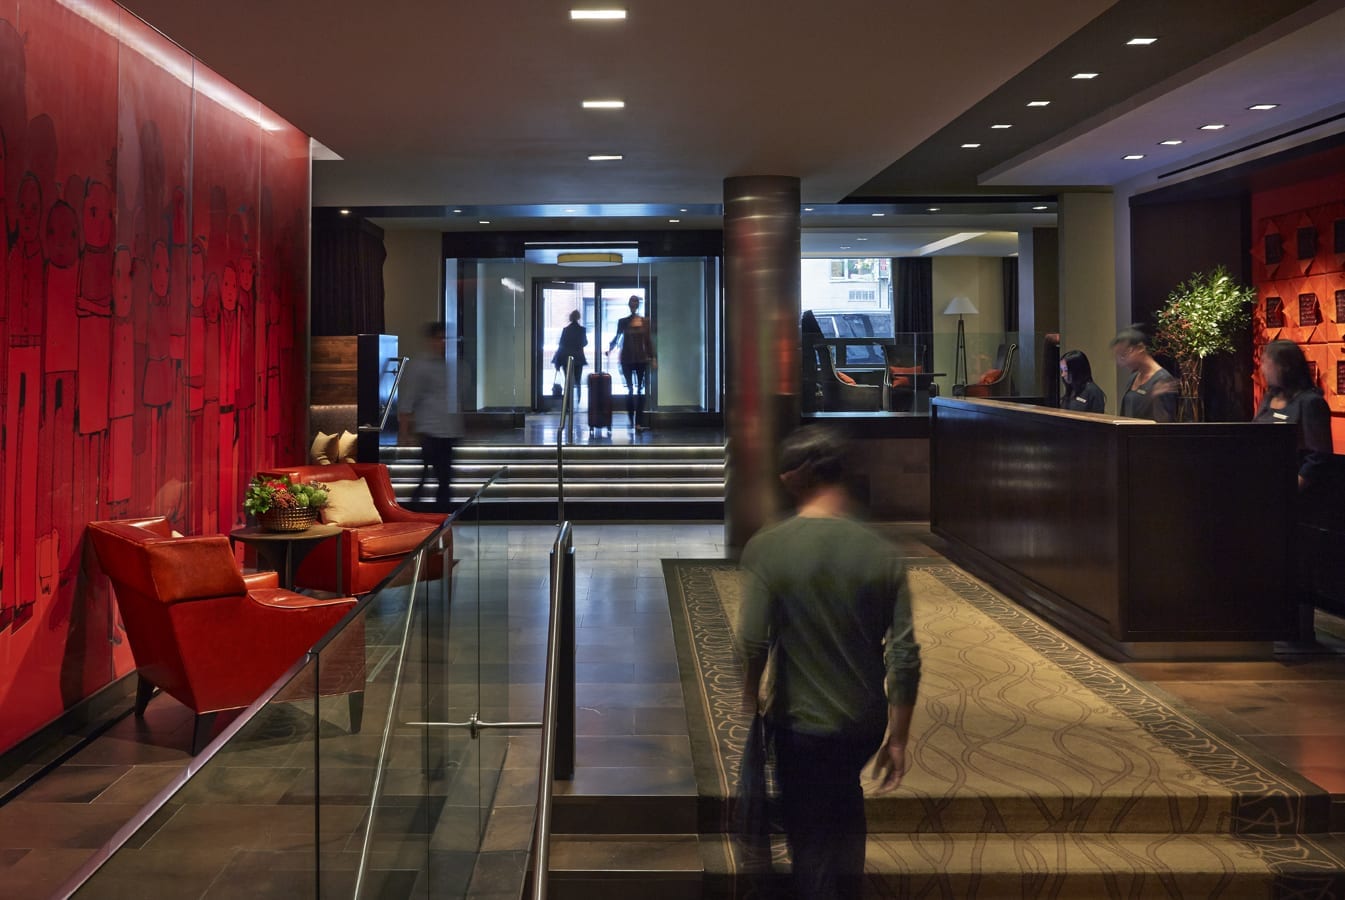 A man walks up the stairs leading to Shelburne Hotel and Suites' front desk. Across at the left are two red chairs against a red wall dressed with texture.